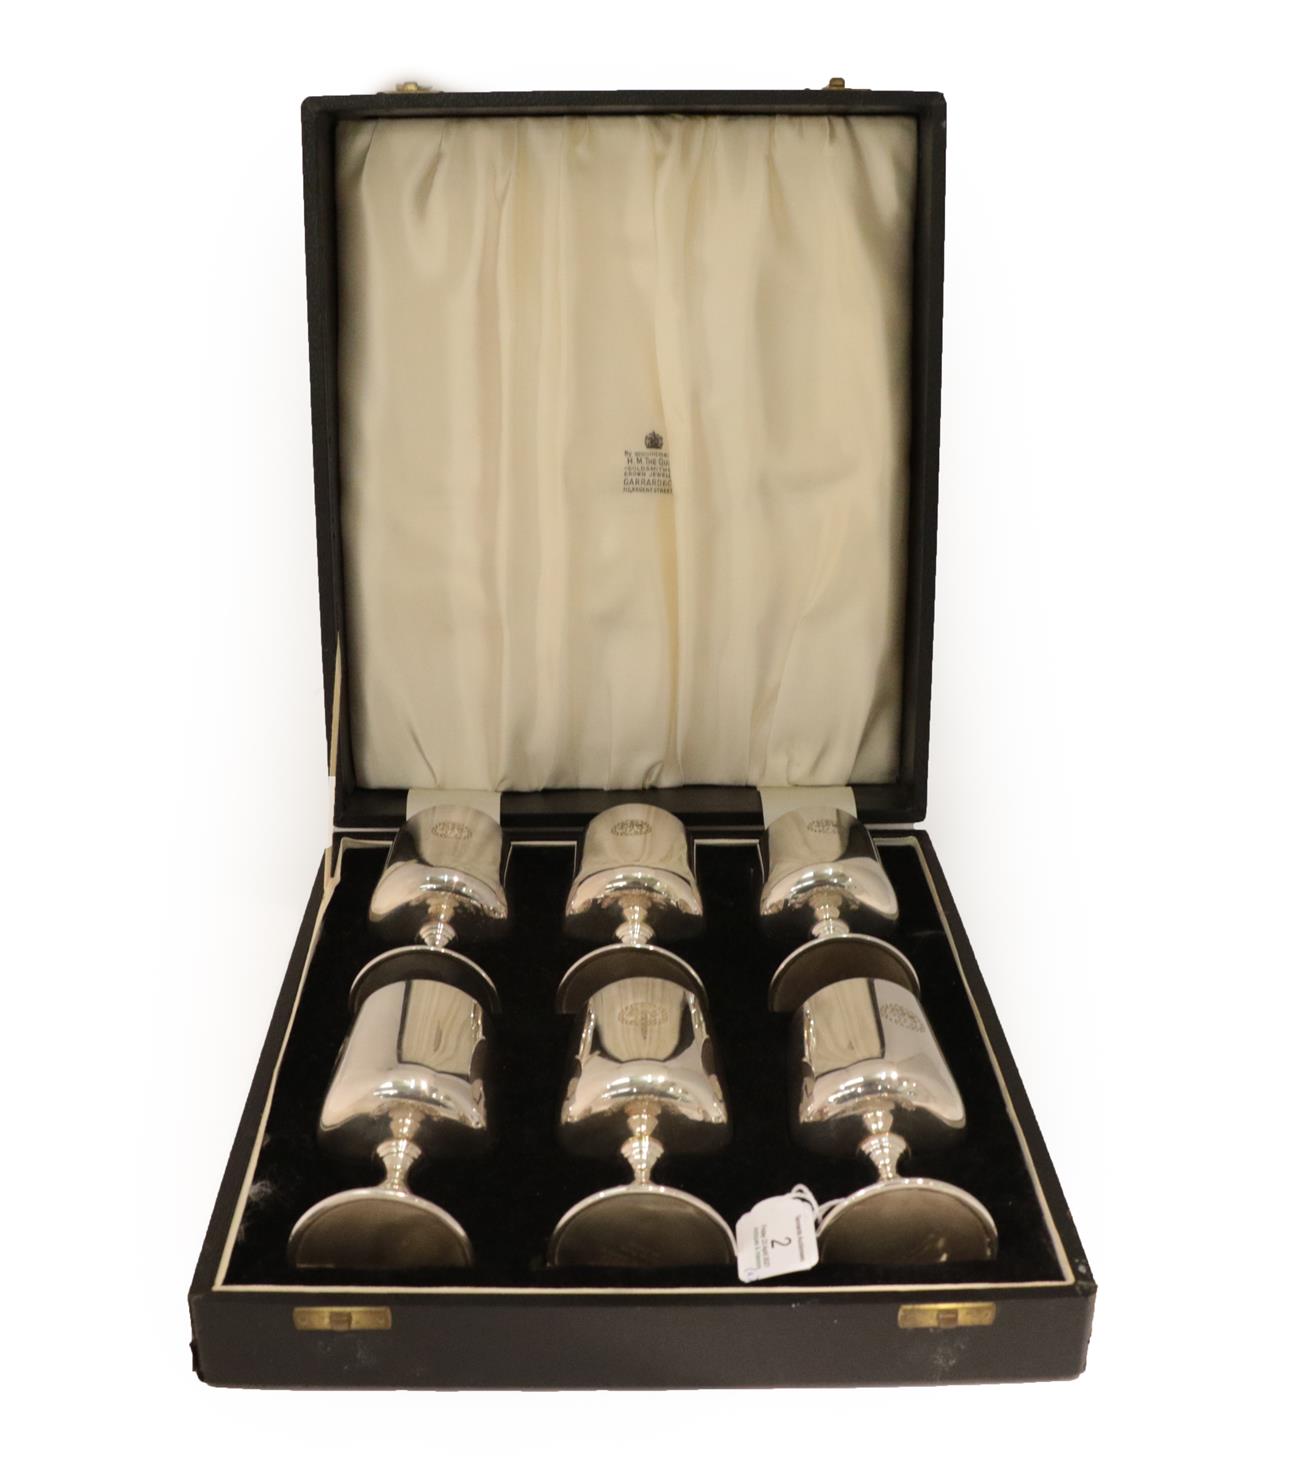 Lot 2 - The Griffin Goblets: A Cased Set of Six Elizabeth II Silver Plate Wine-Goblets, by Garrard and Co.